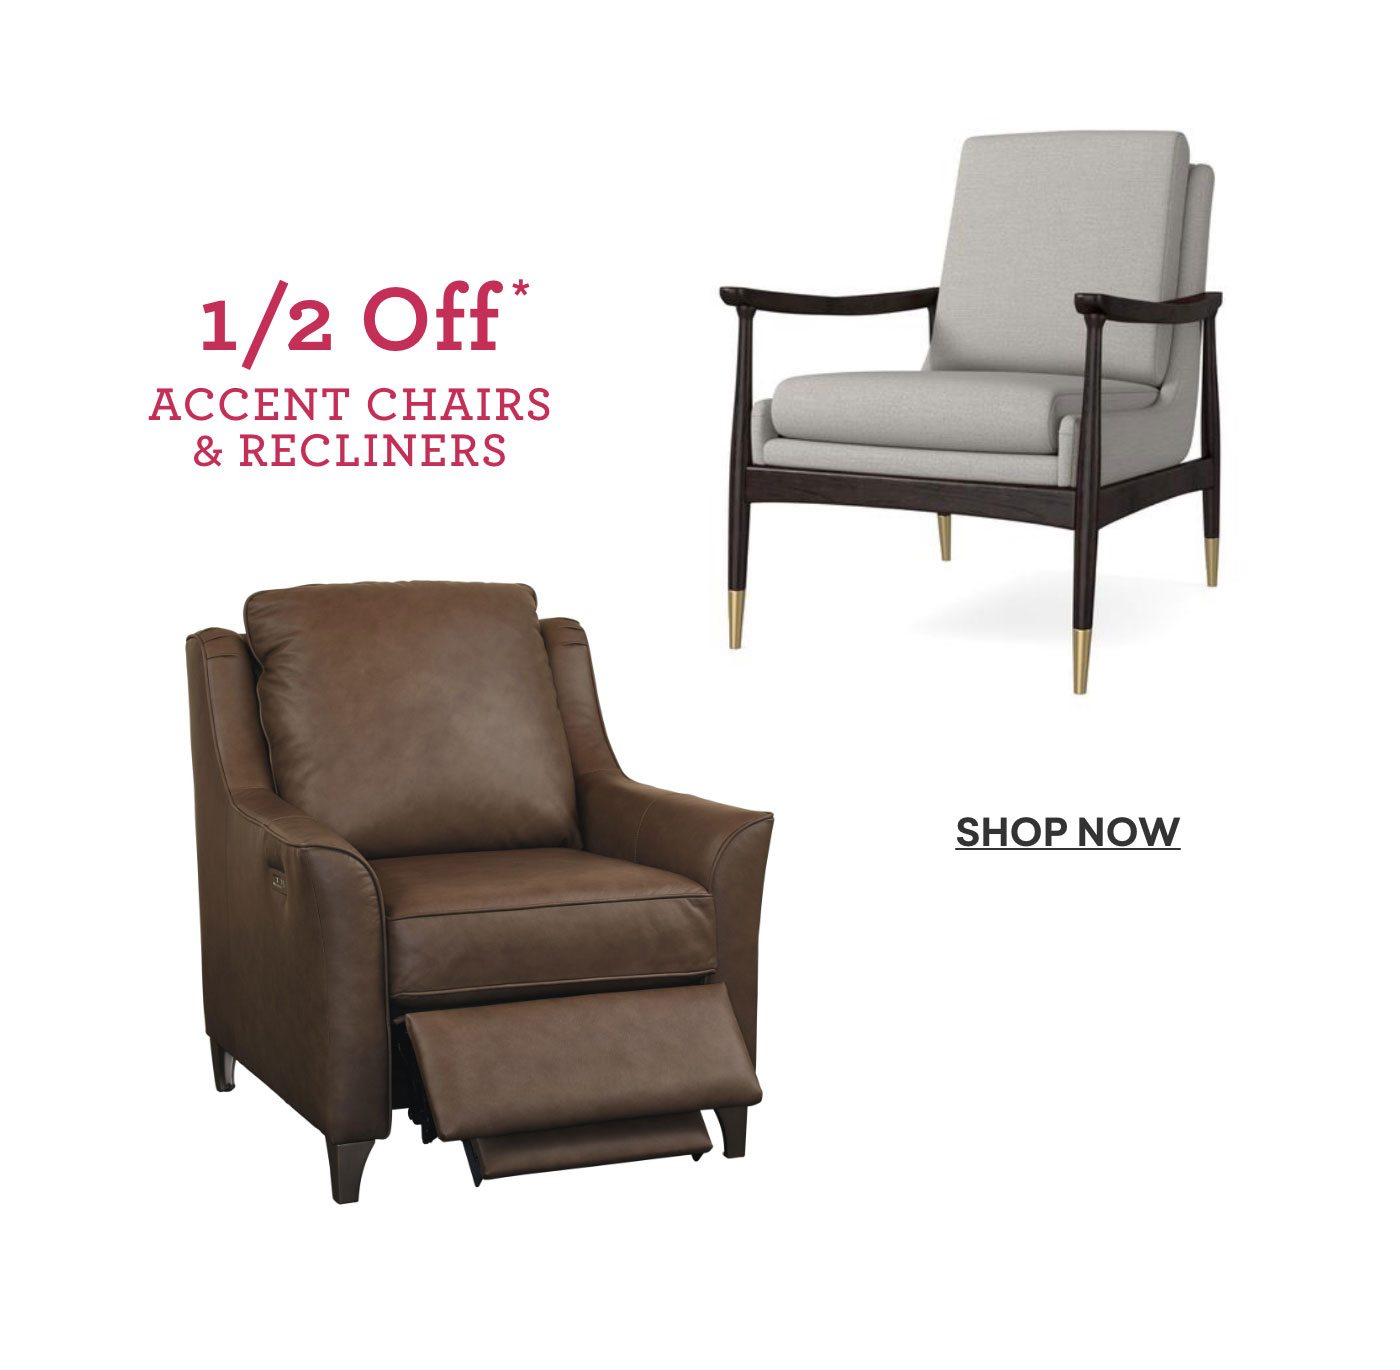 Half off accent chairs and recliners. Shop now.